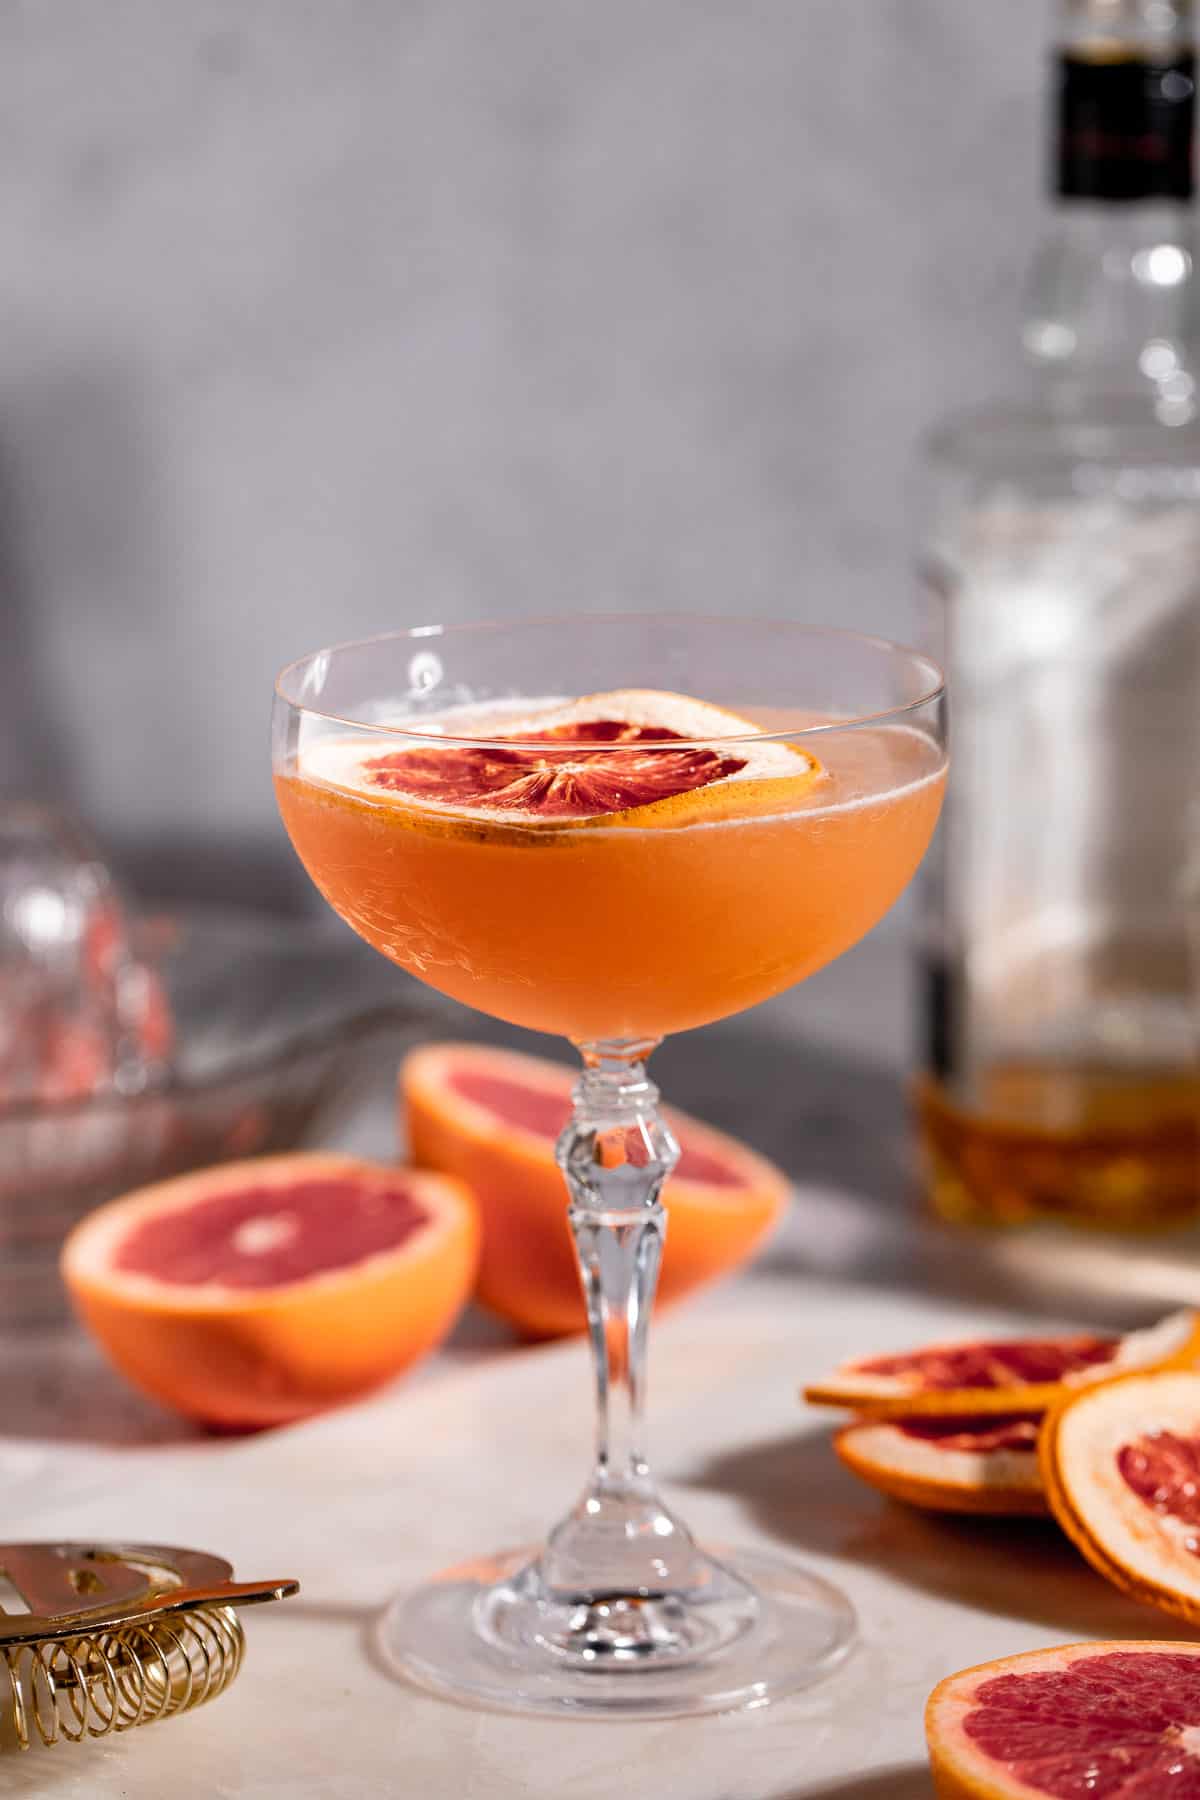 A Brown Derby Cocktail served in a stemmed glass garnished with a slice of grapefruit.